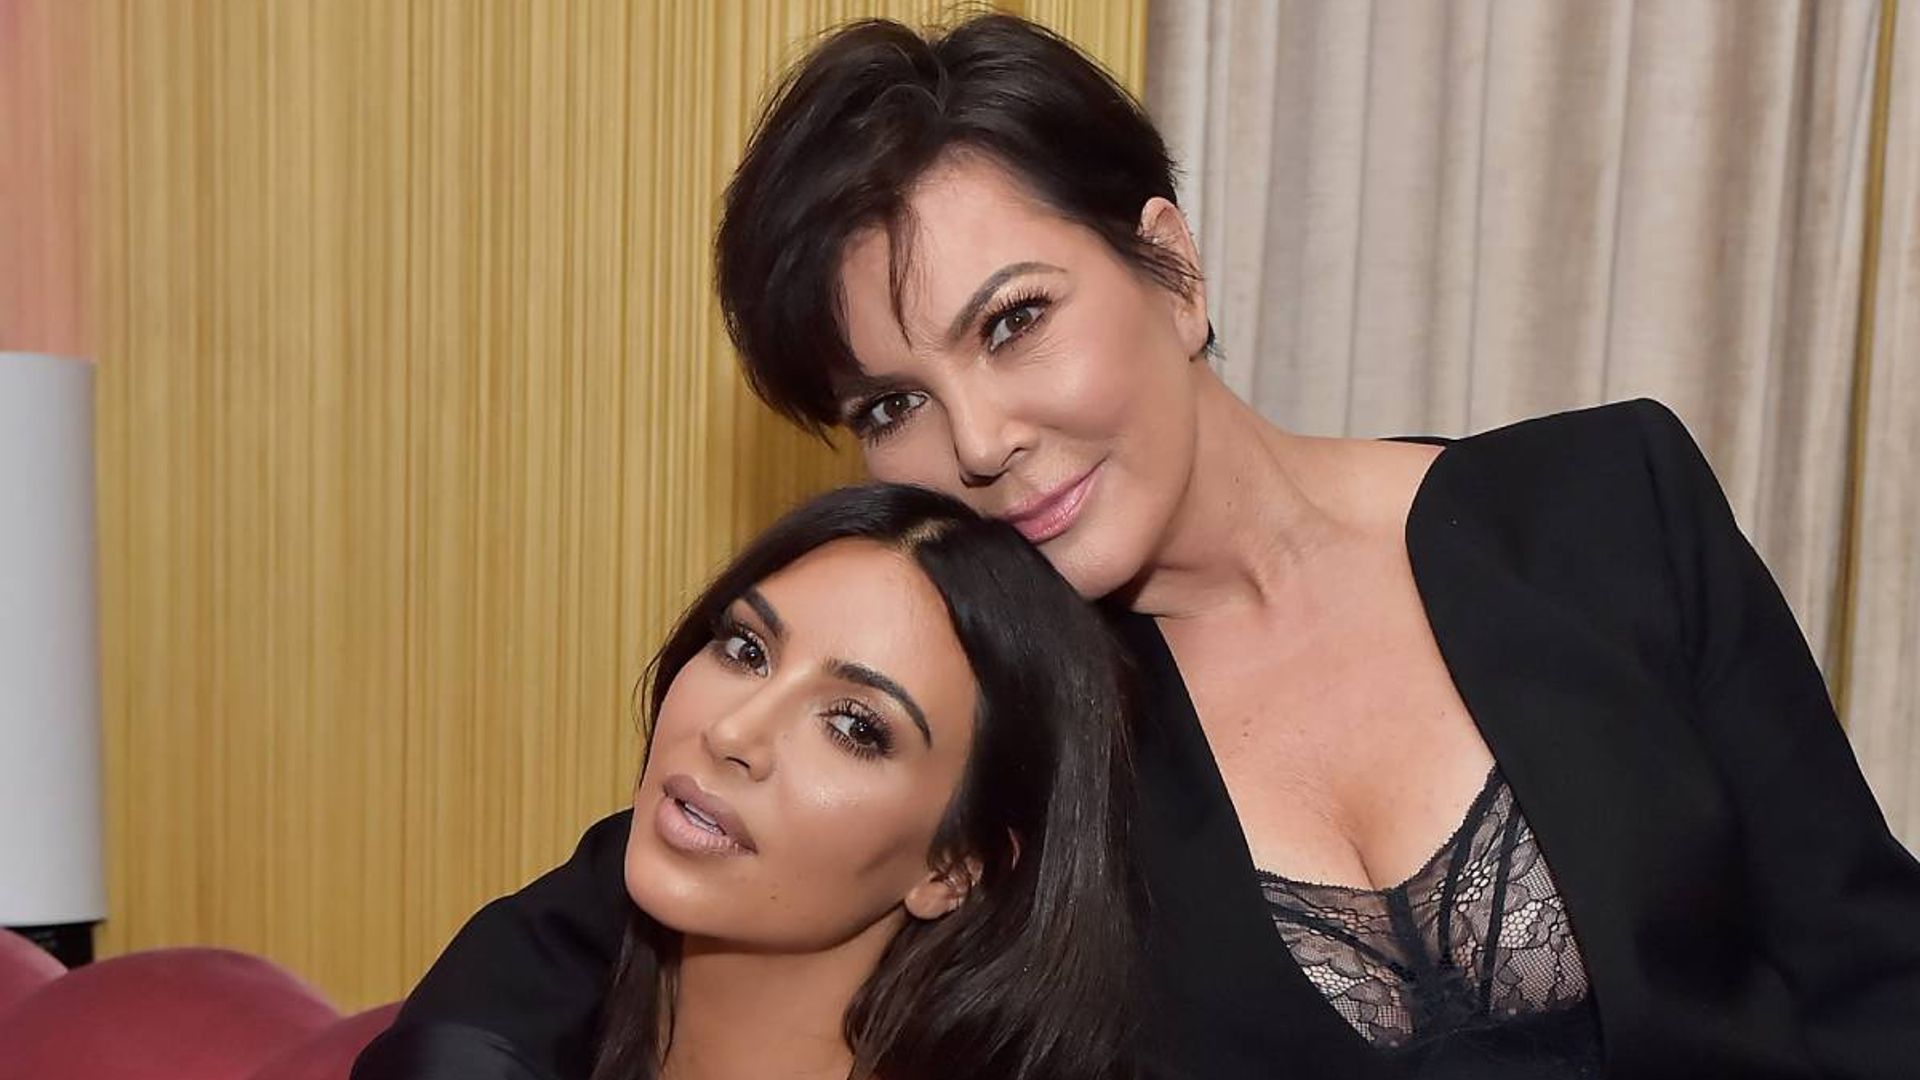 Kris Jenner looks unrecognisable in school photos years before becoming the Kardashians' momager